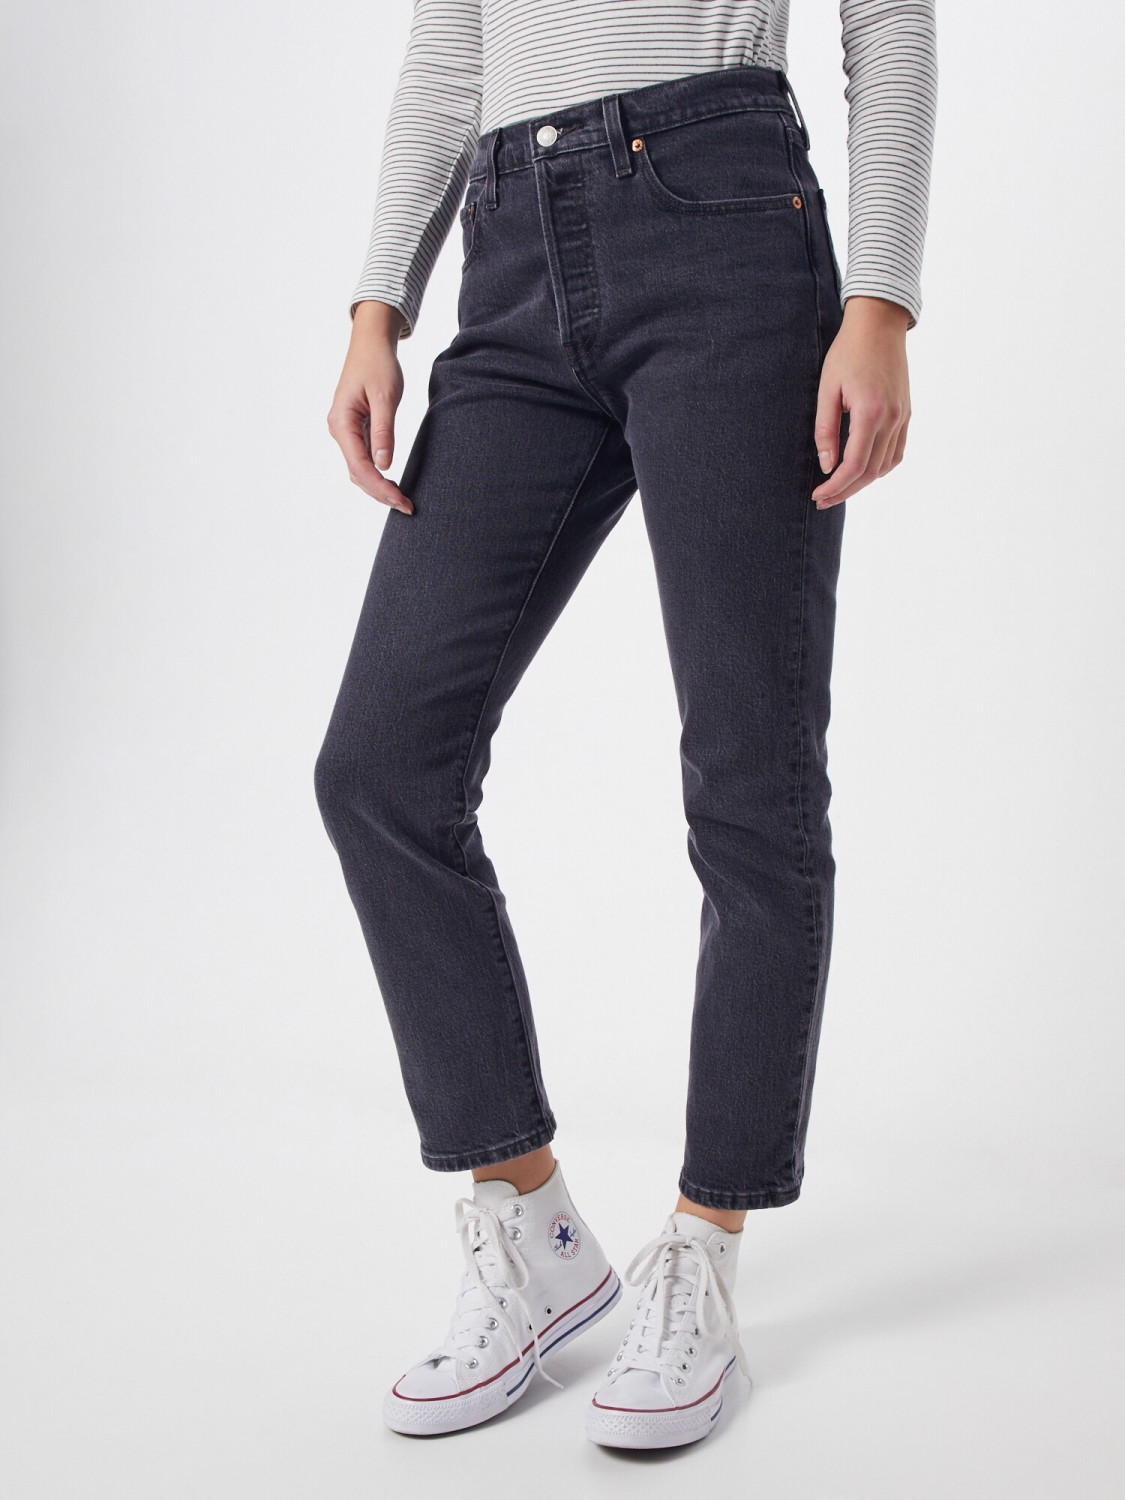 Buy Levi's 501 Crop Jeans cabo fade from £38.50 (Today) – Best Deals on ...